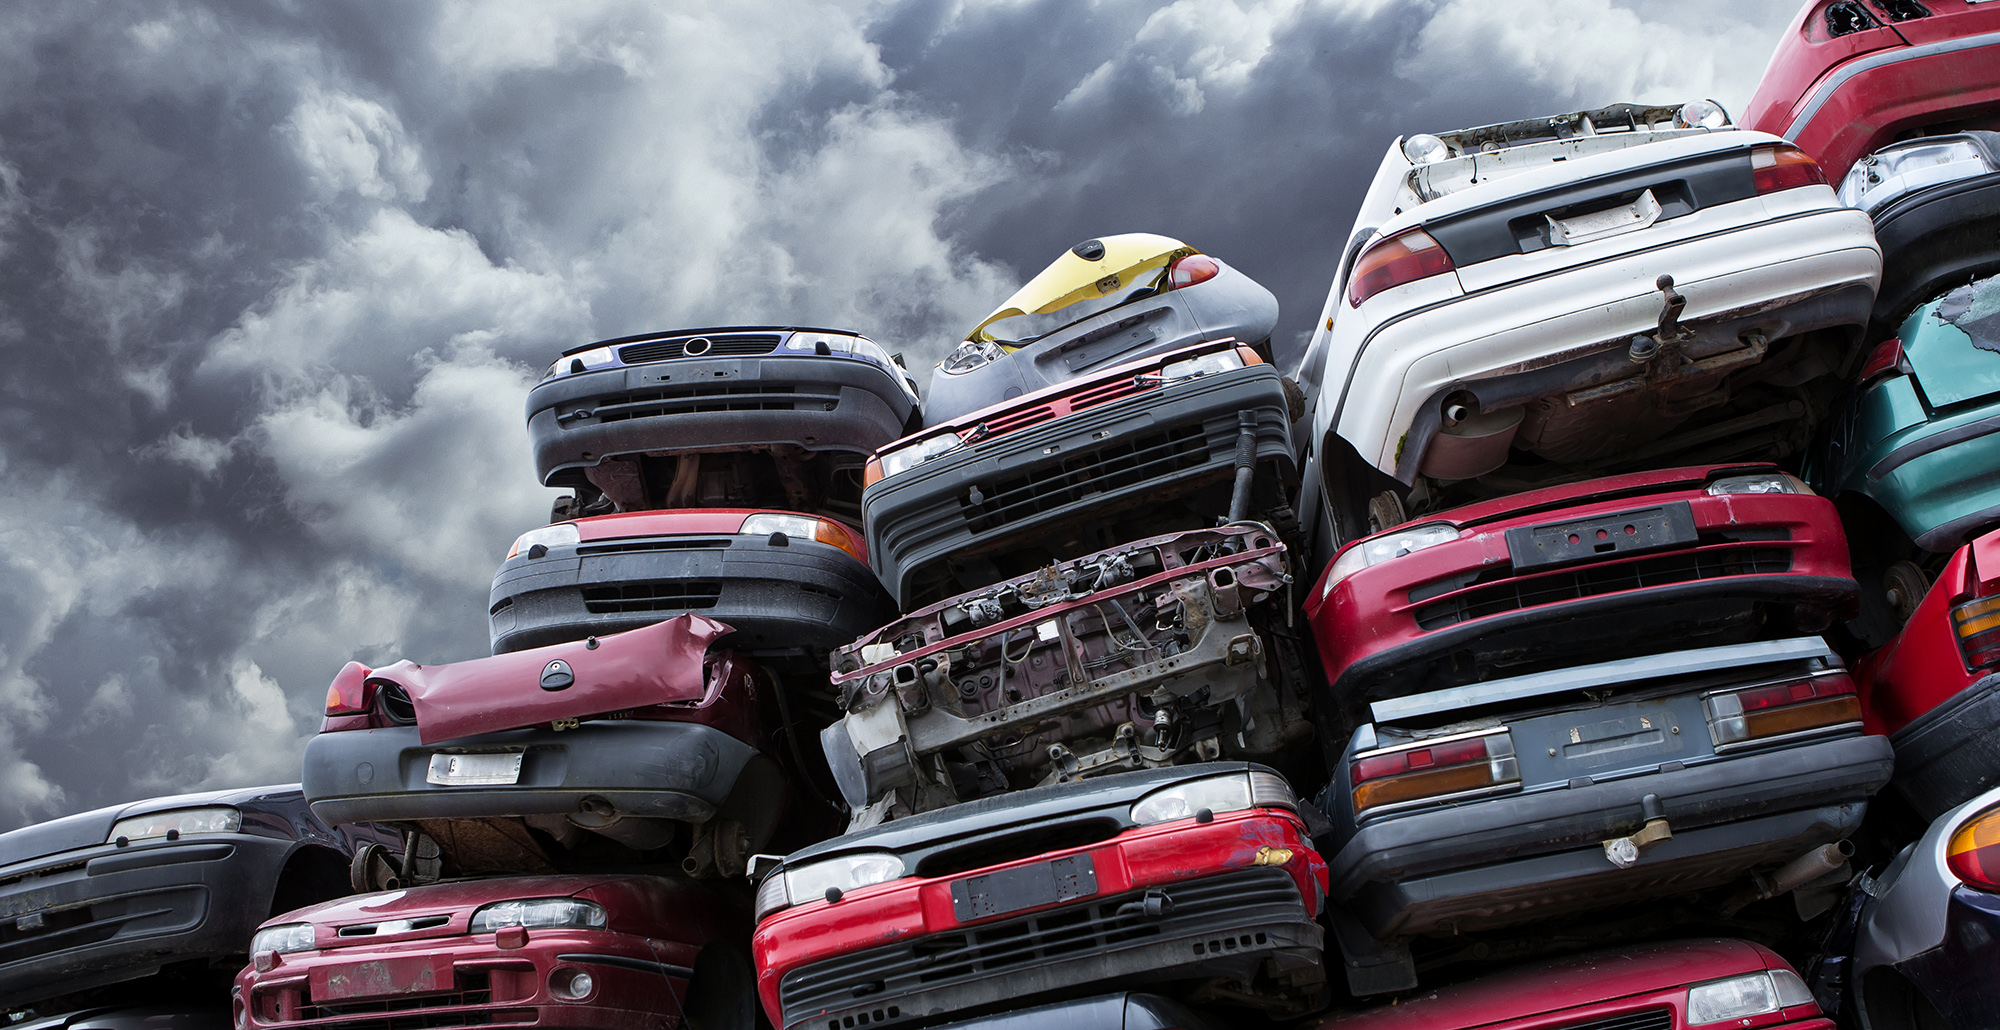 scrap any car for the best price